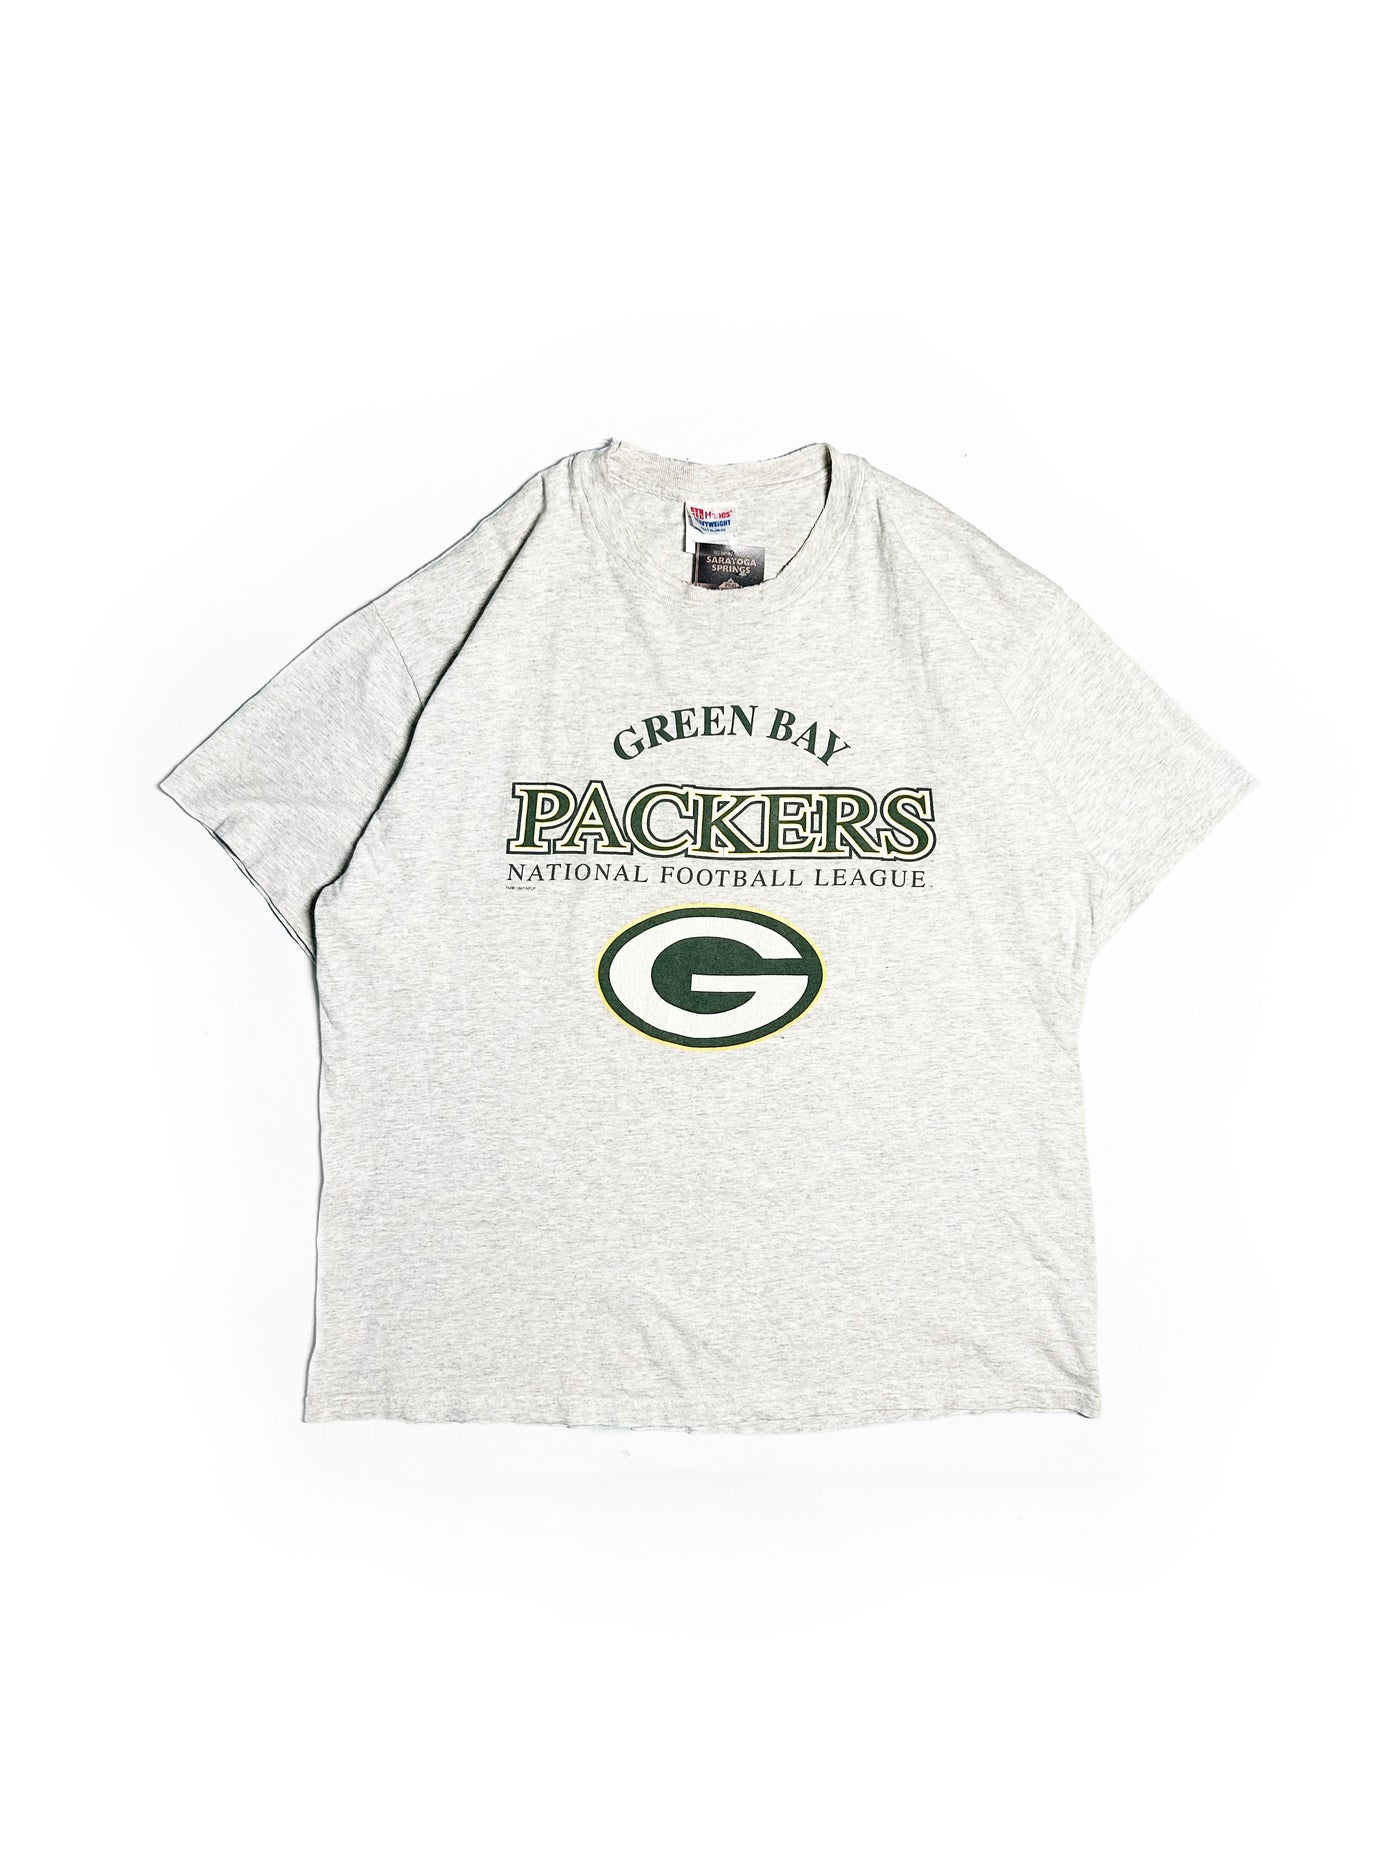 Vintage 1996 Green Bay Packers Spellout T-Shirt